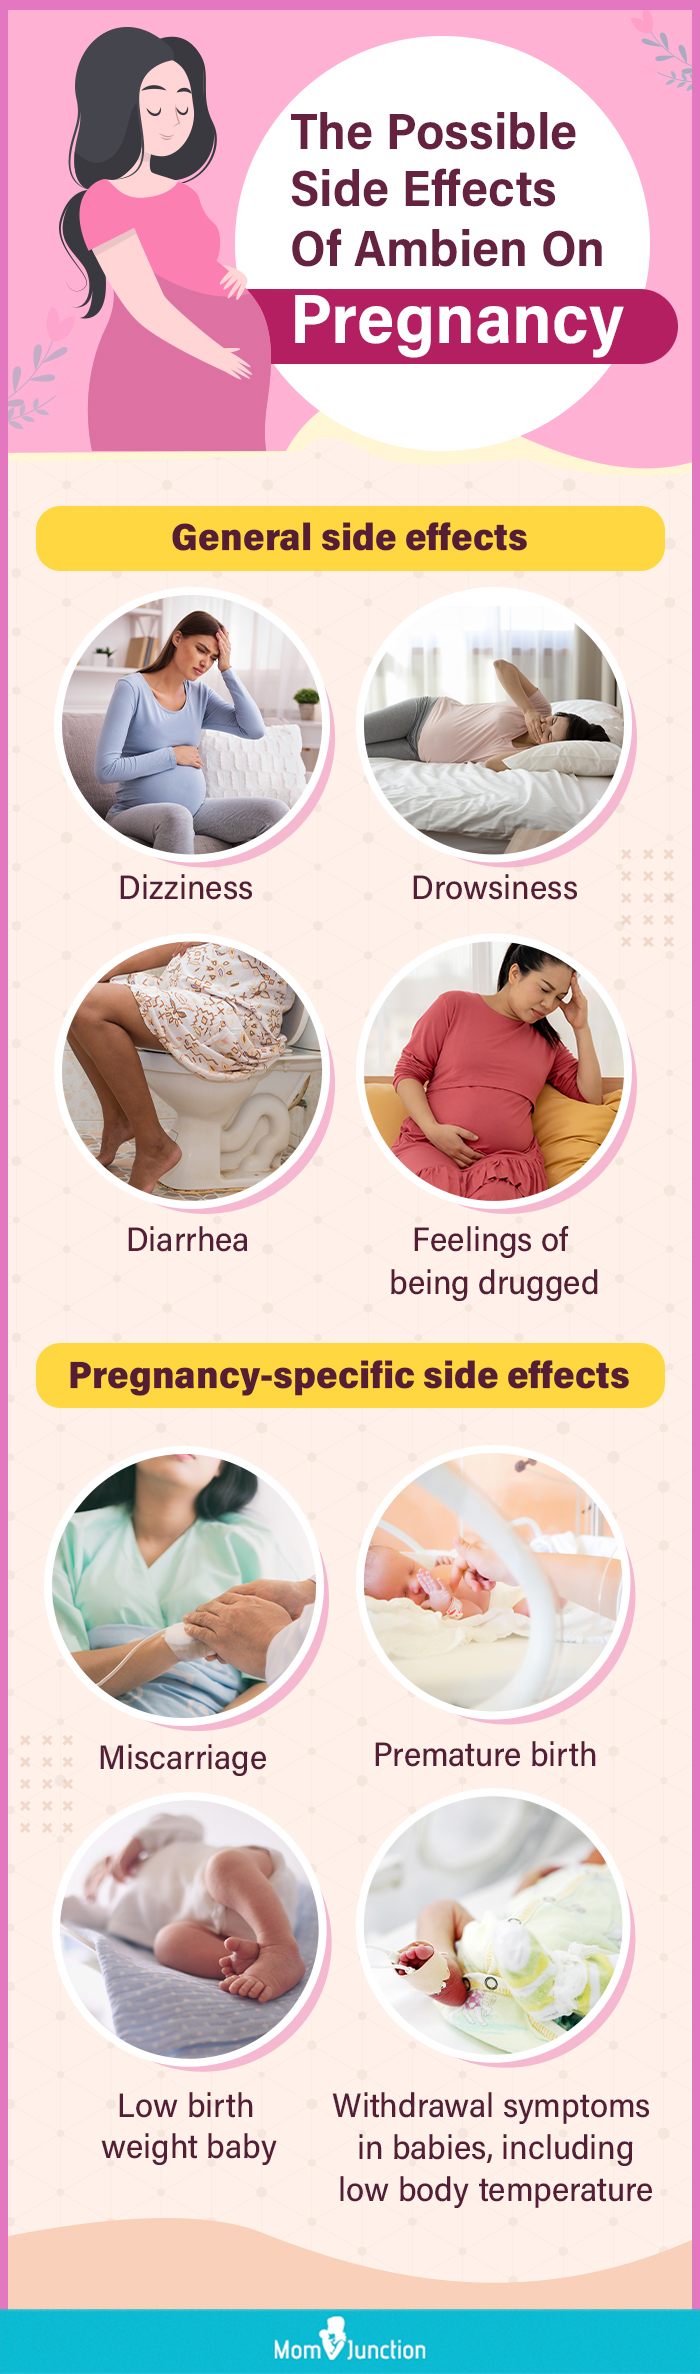 the possible side effects of ambien on pregnancy (infographic)